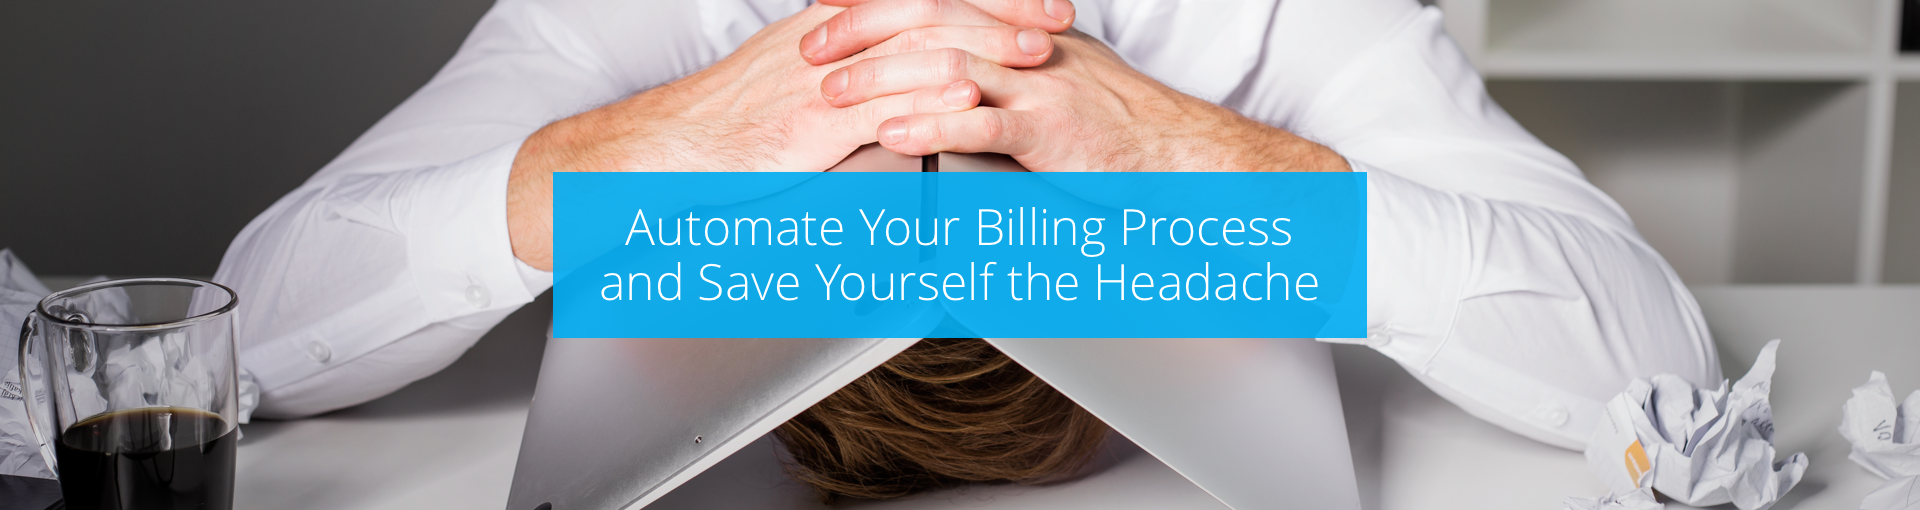 Automate Your Billing Process and Save Yourself the Headache Featured Image